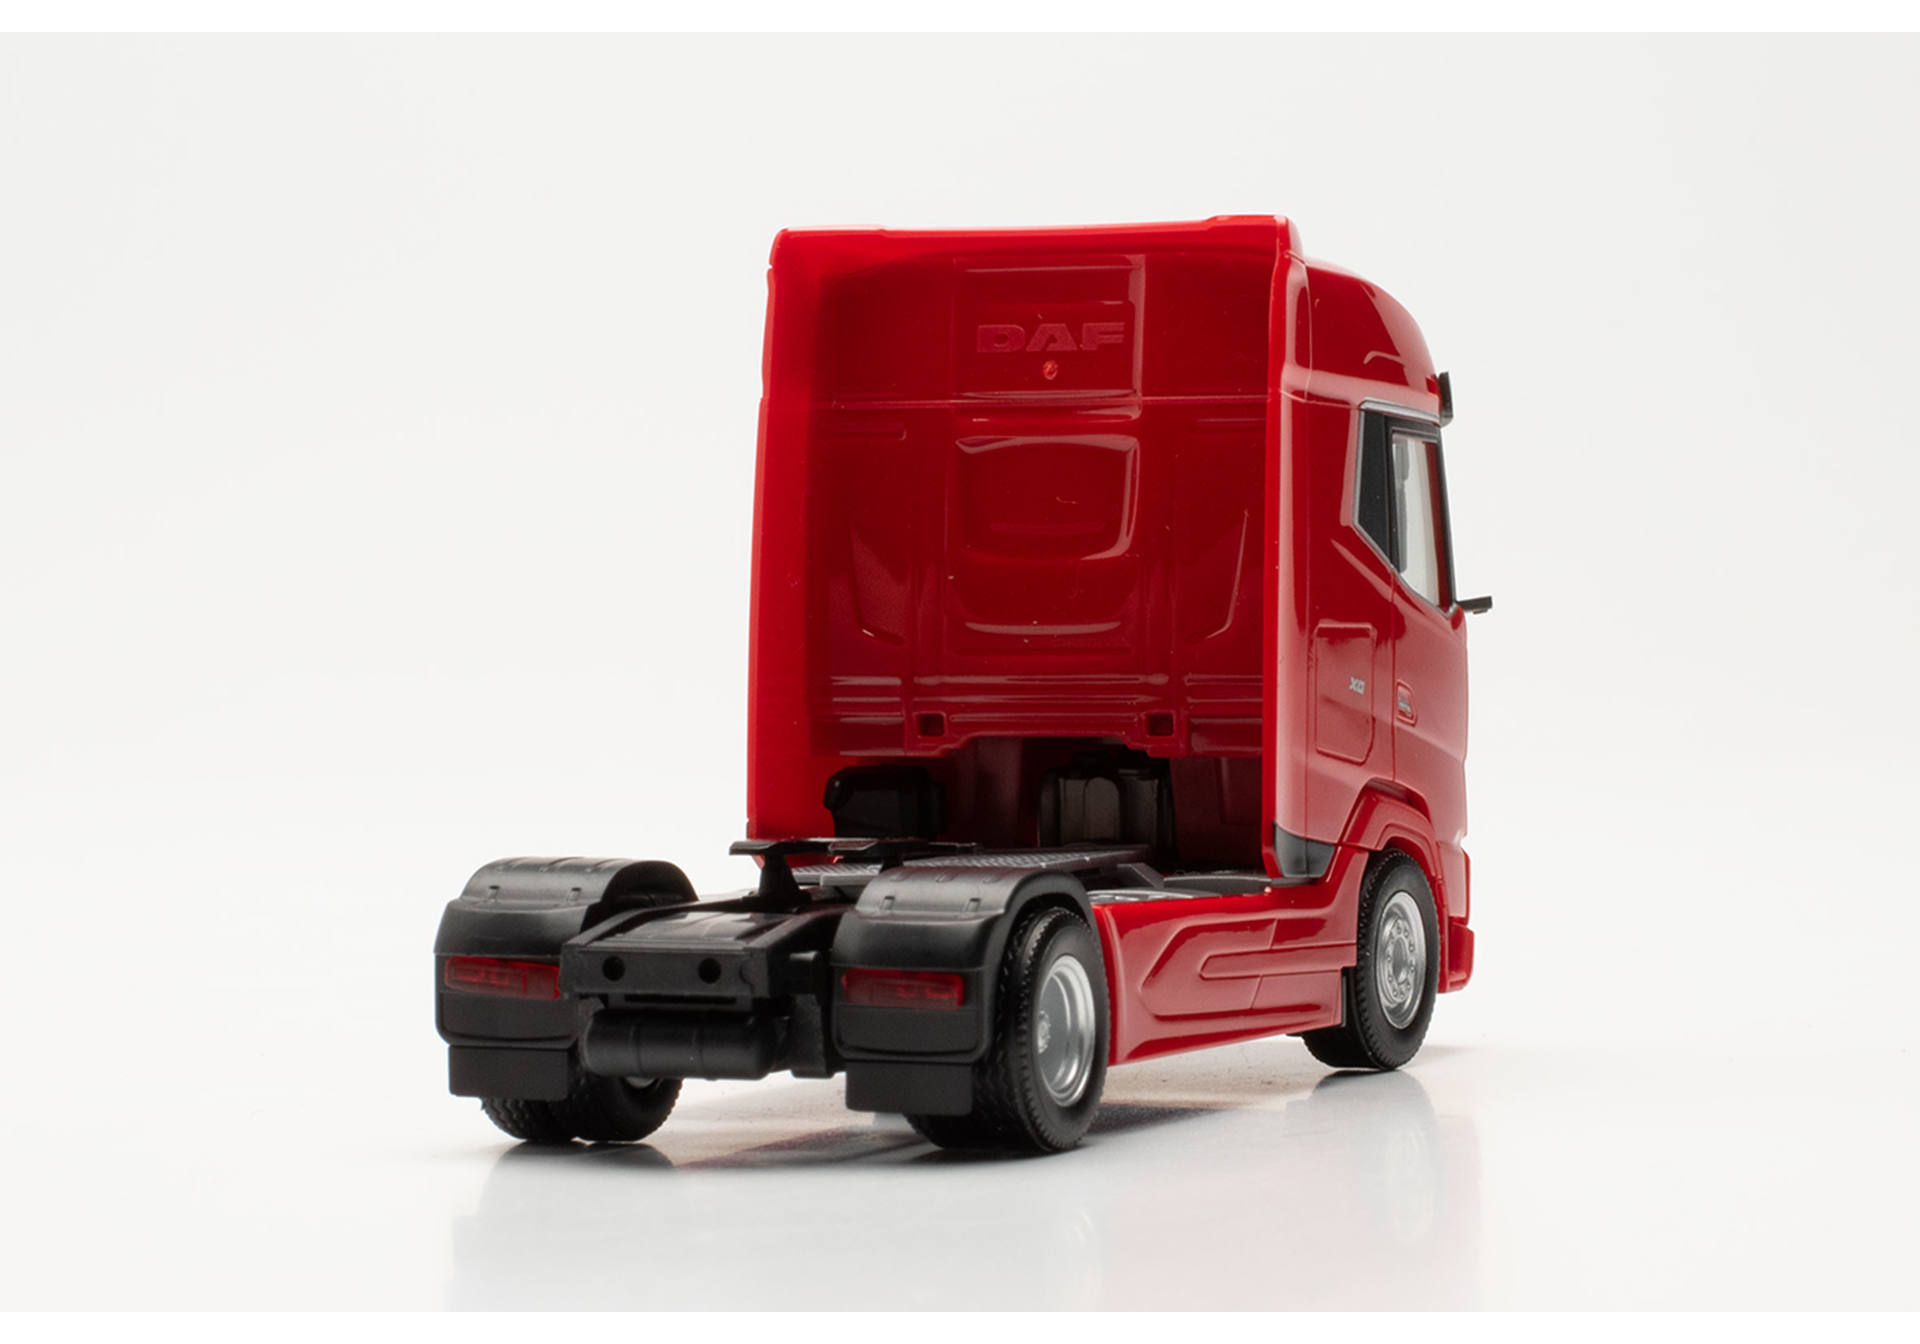 DAF XG tractor, red